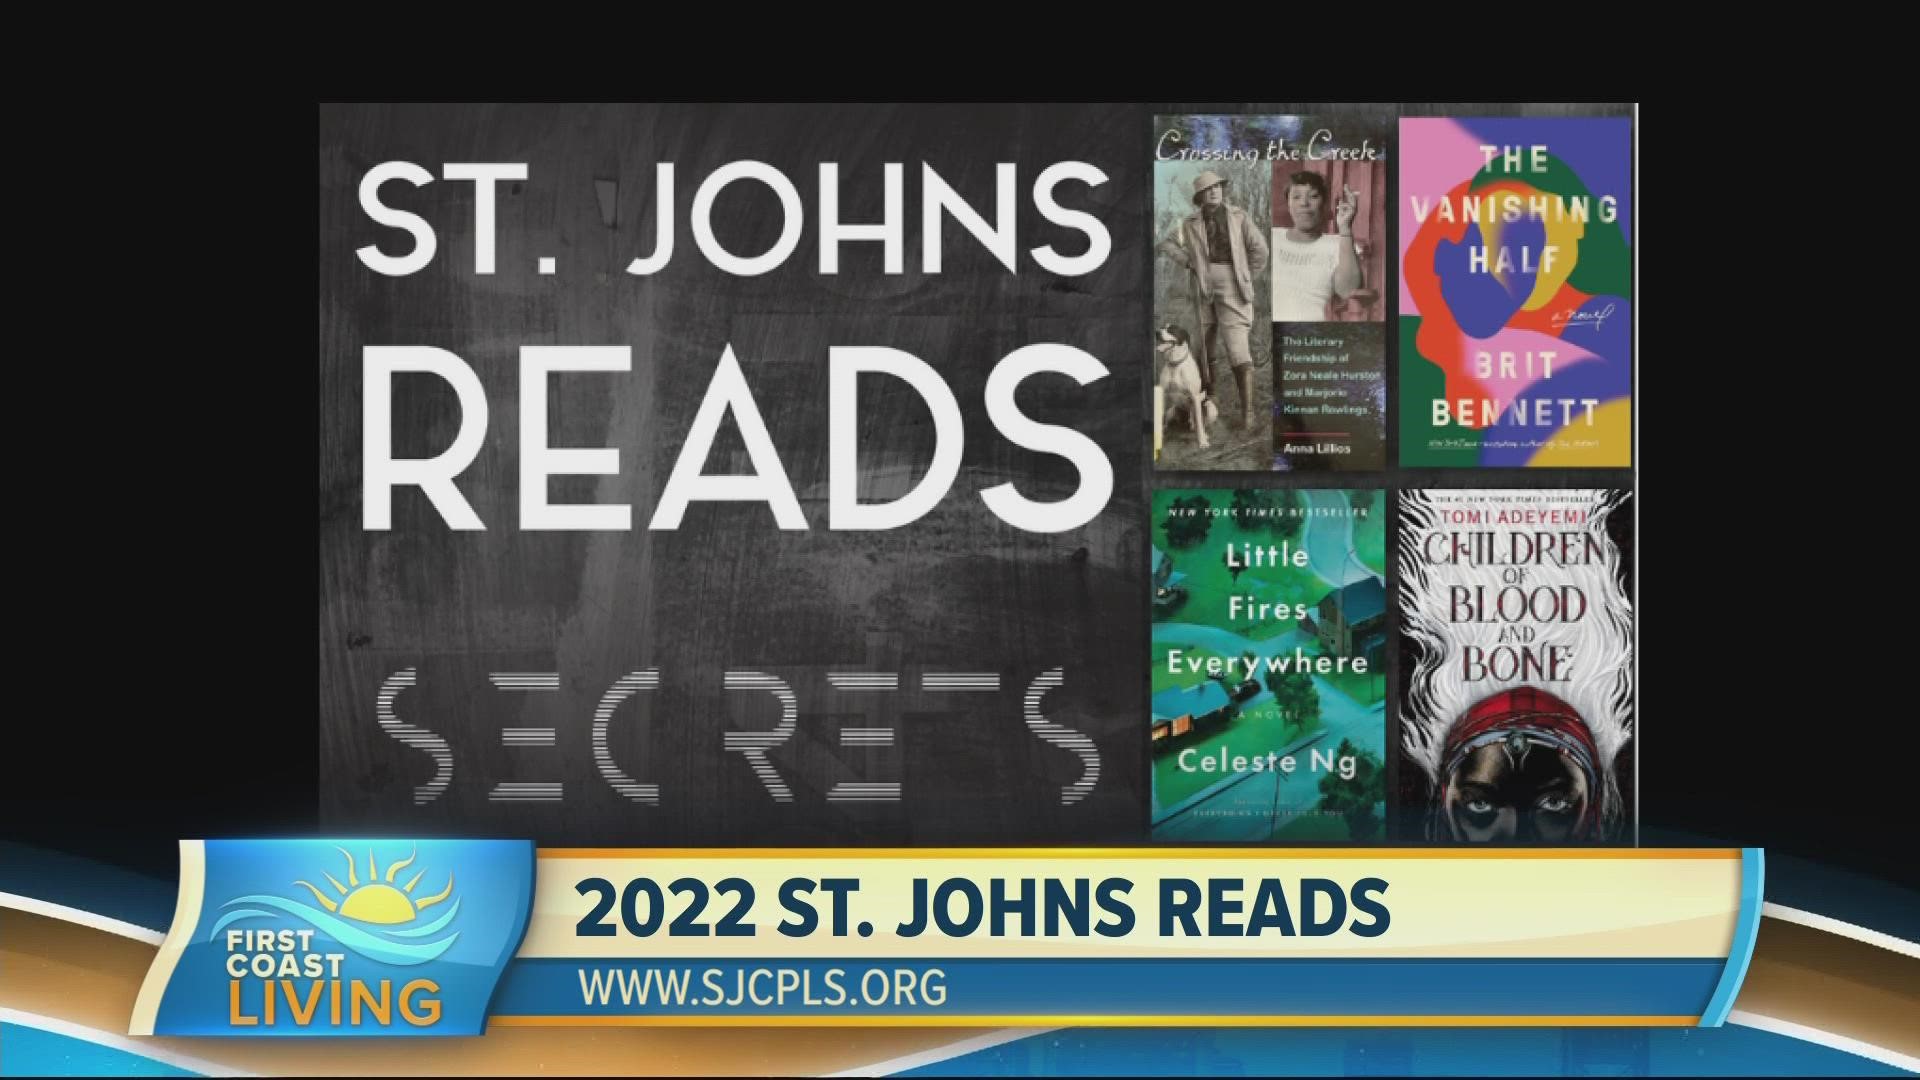 Learn about the annual countywide reading event hosted by the St. Johns County Public Library System, which includes a grand finale 5K.